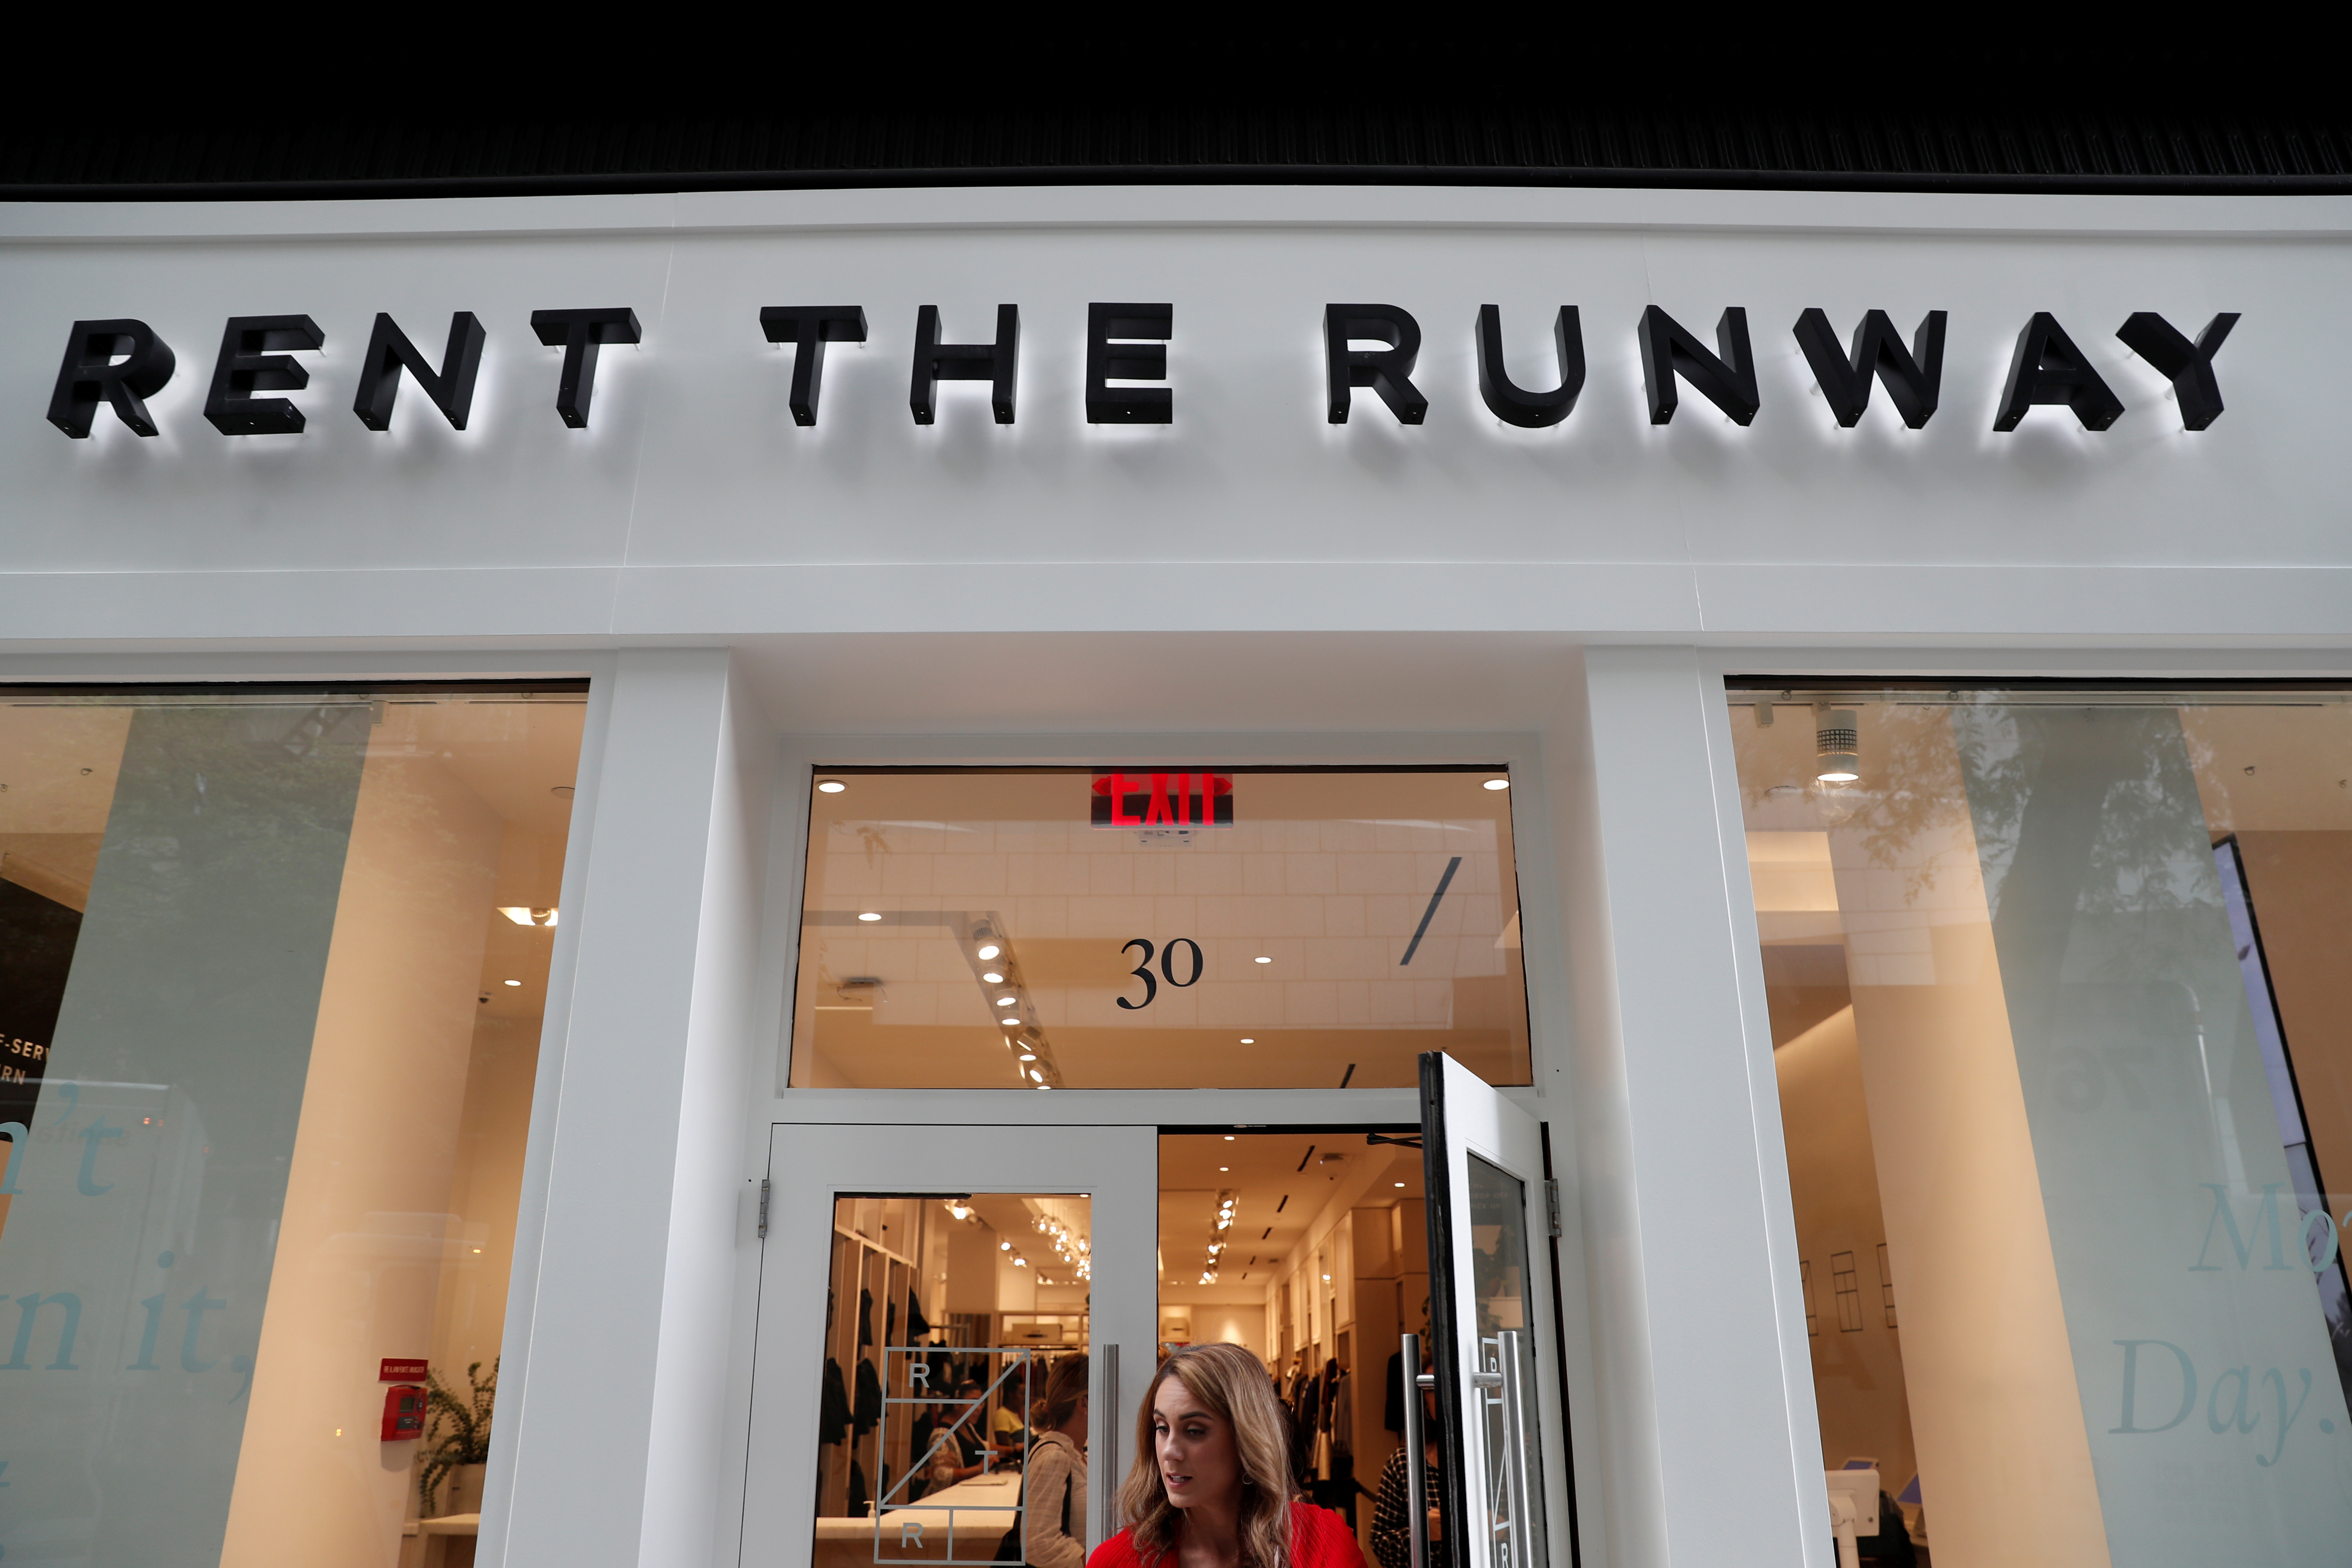 The Rent The Runway store, an online subscription service for women to rent designer dress and accessory items, is seen in New York City, New York, U.S., September 12, 2019.  REUTERS/Shannon Stapleton